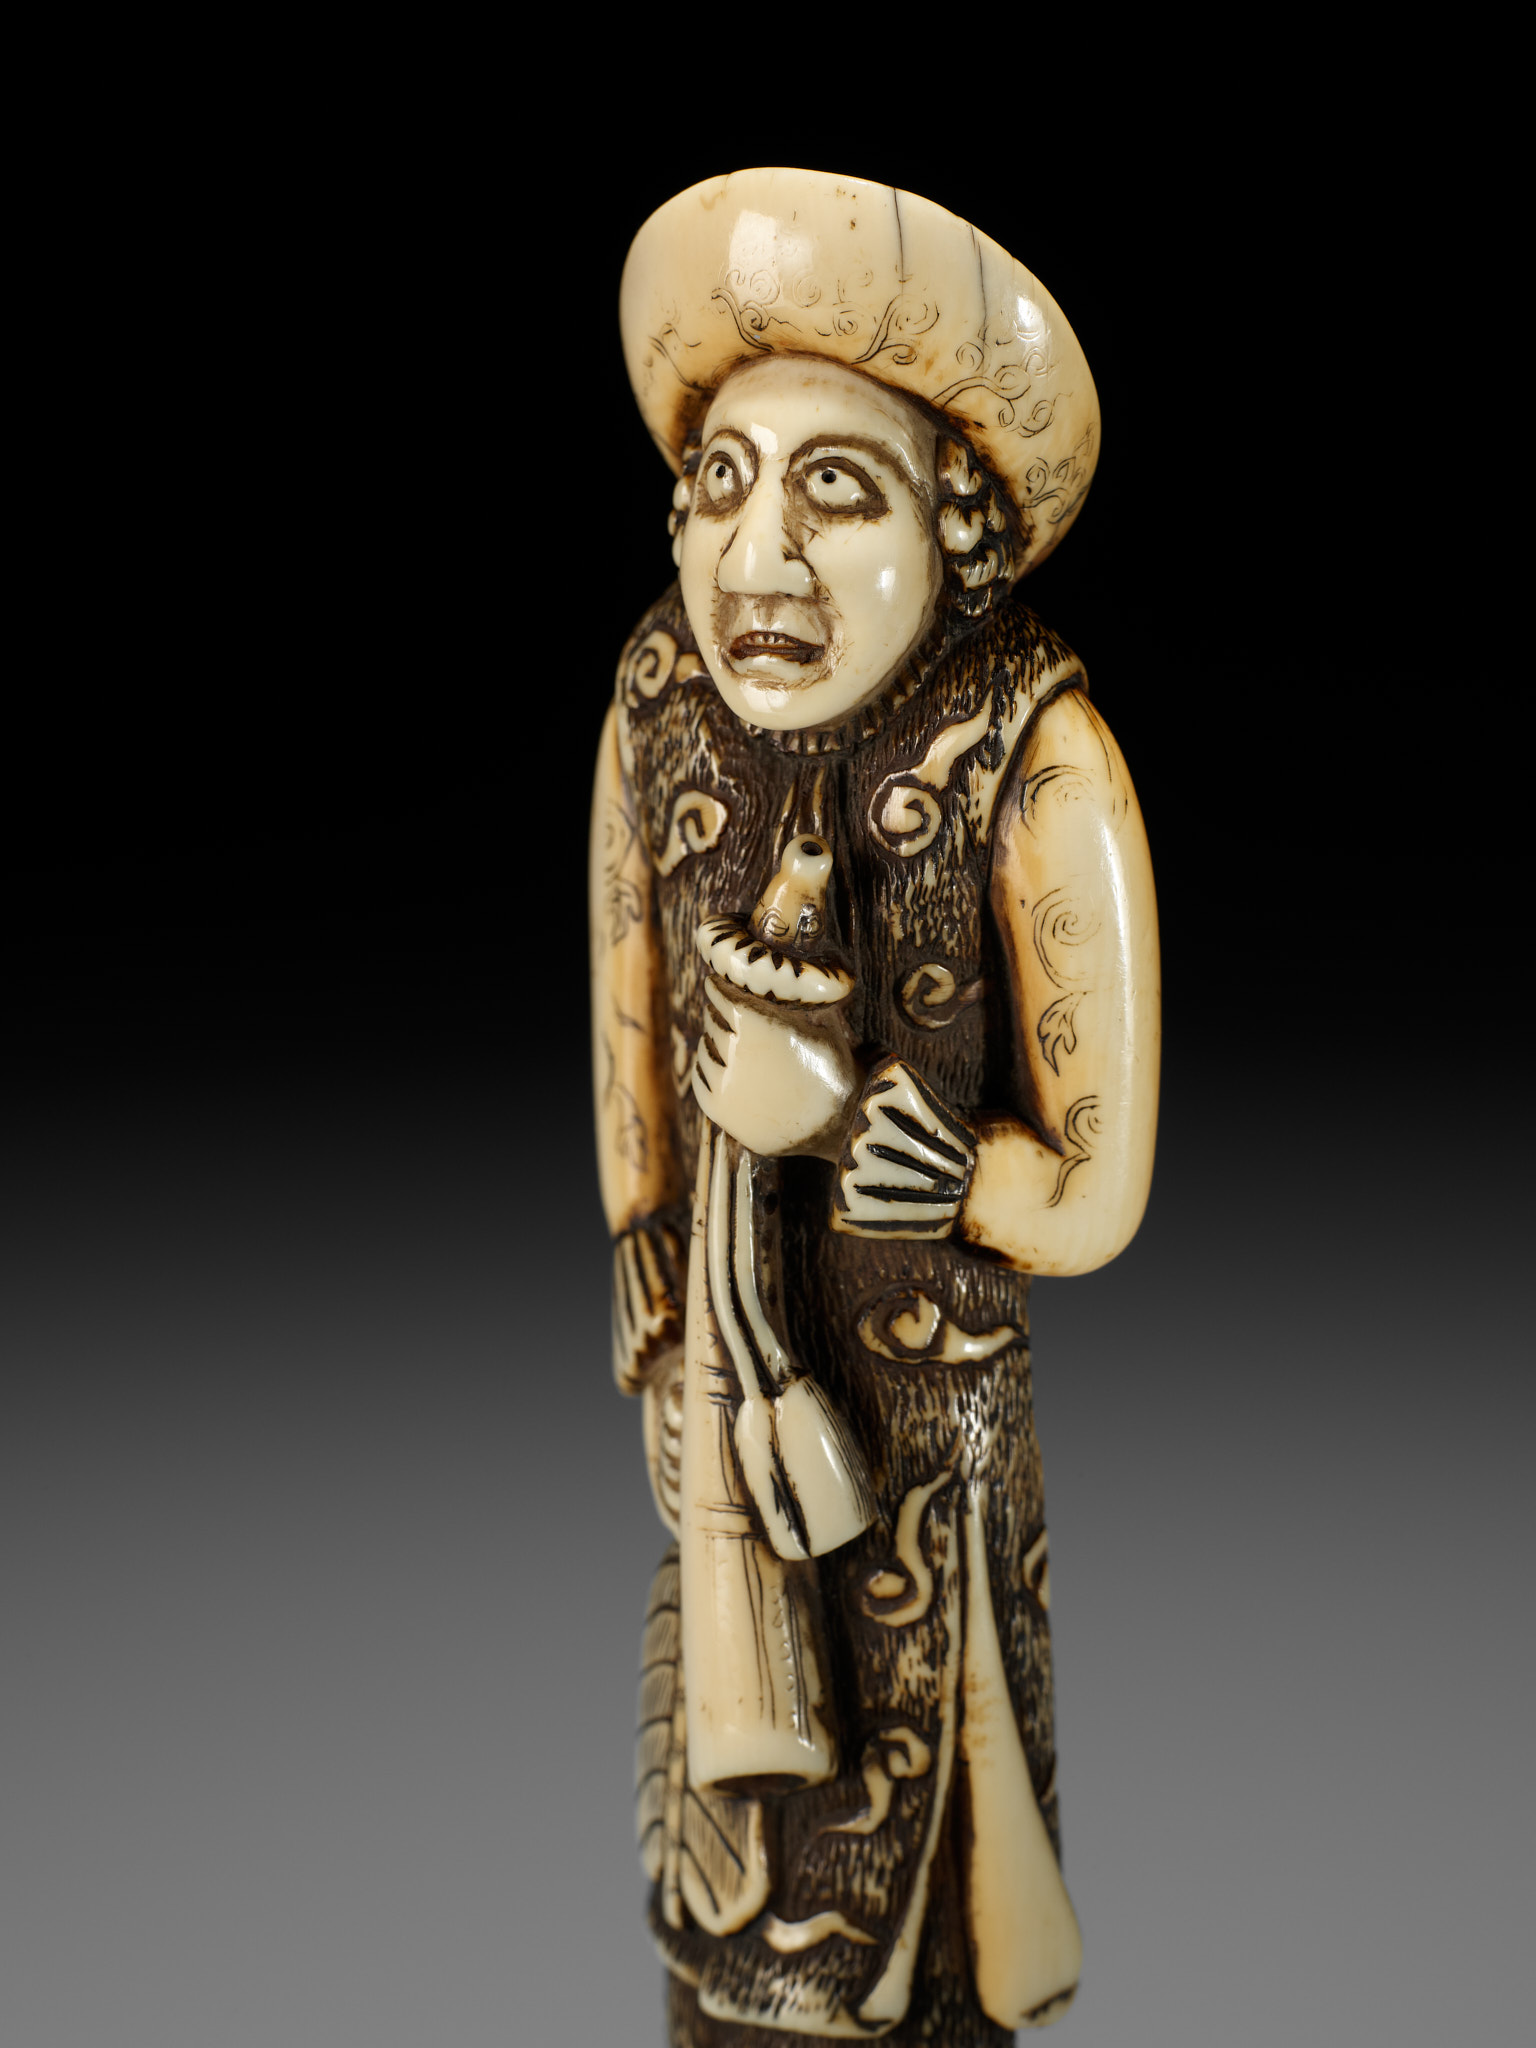 A SUPERB AND LARGE IVORY NETSUKE OF A DUTCHMAN WITH A TRUMPET - Image 19 of 21